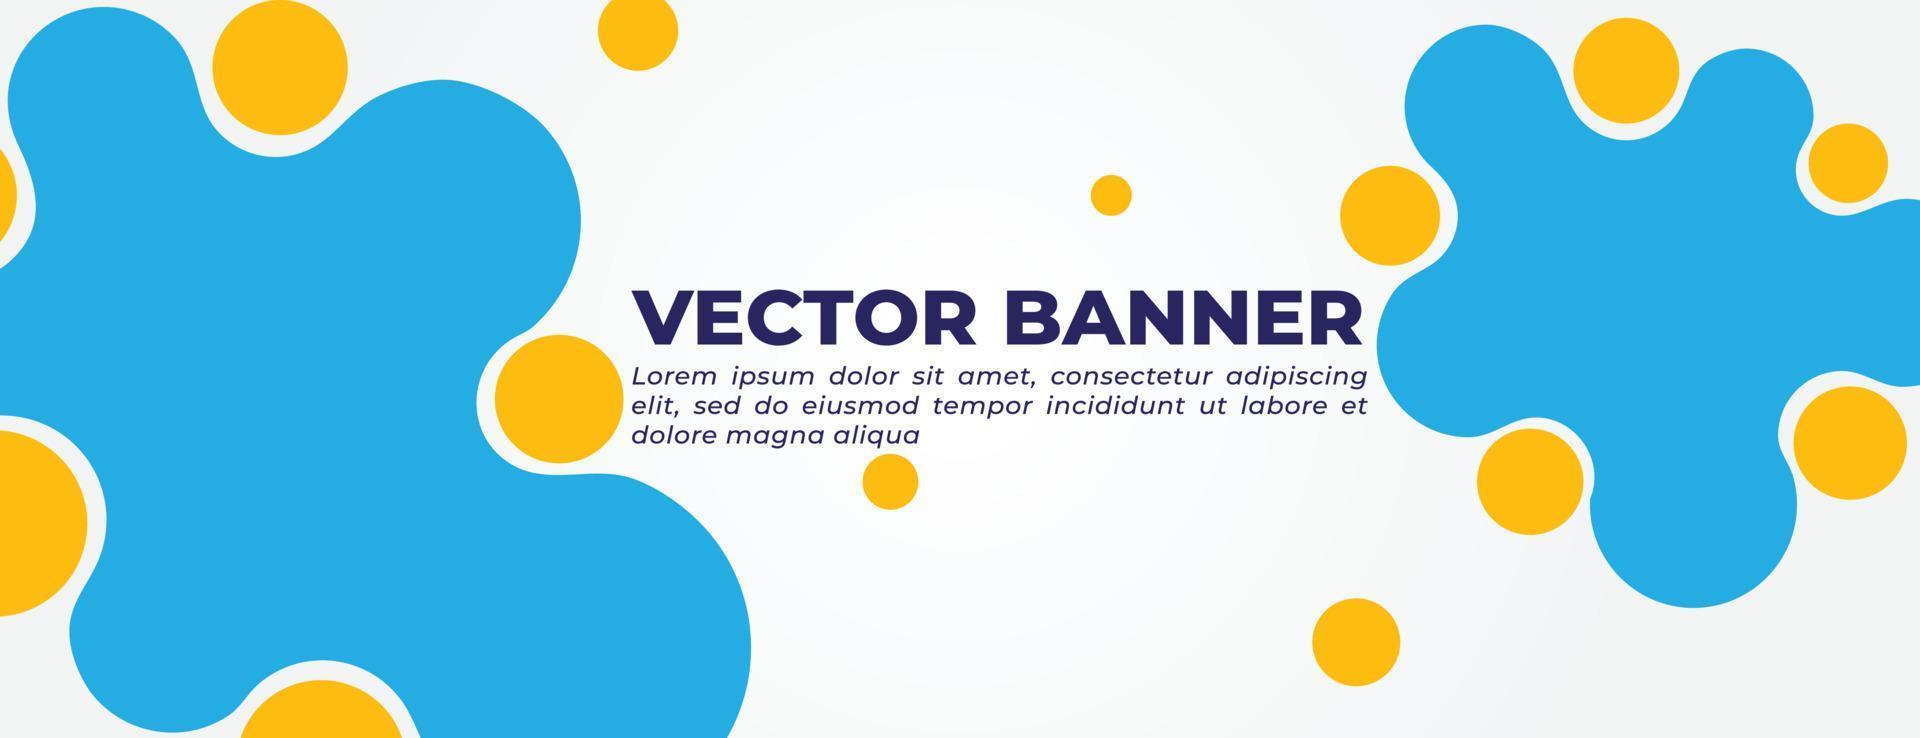 Abstract Rounded Shape Banner Template Design vector